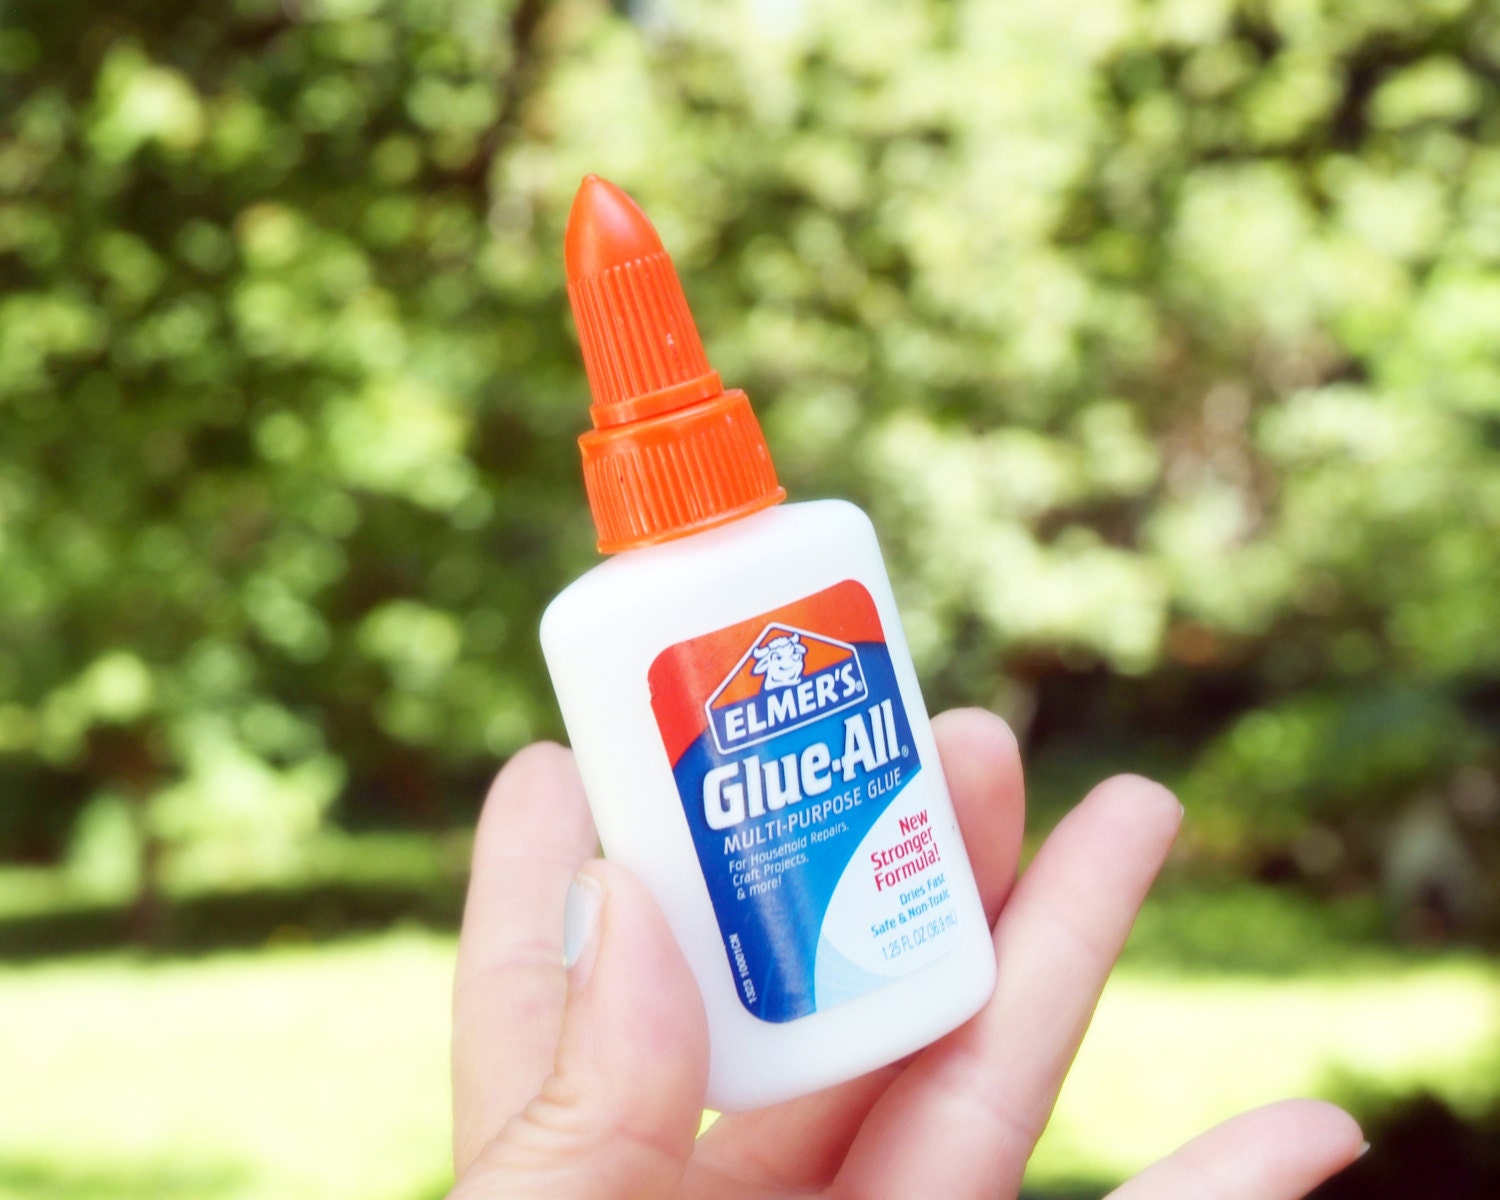 What's the best glue for model making?